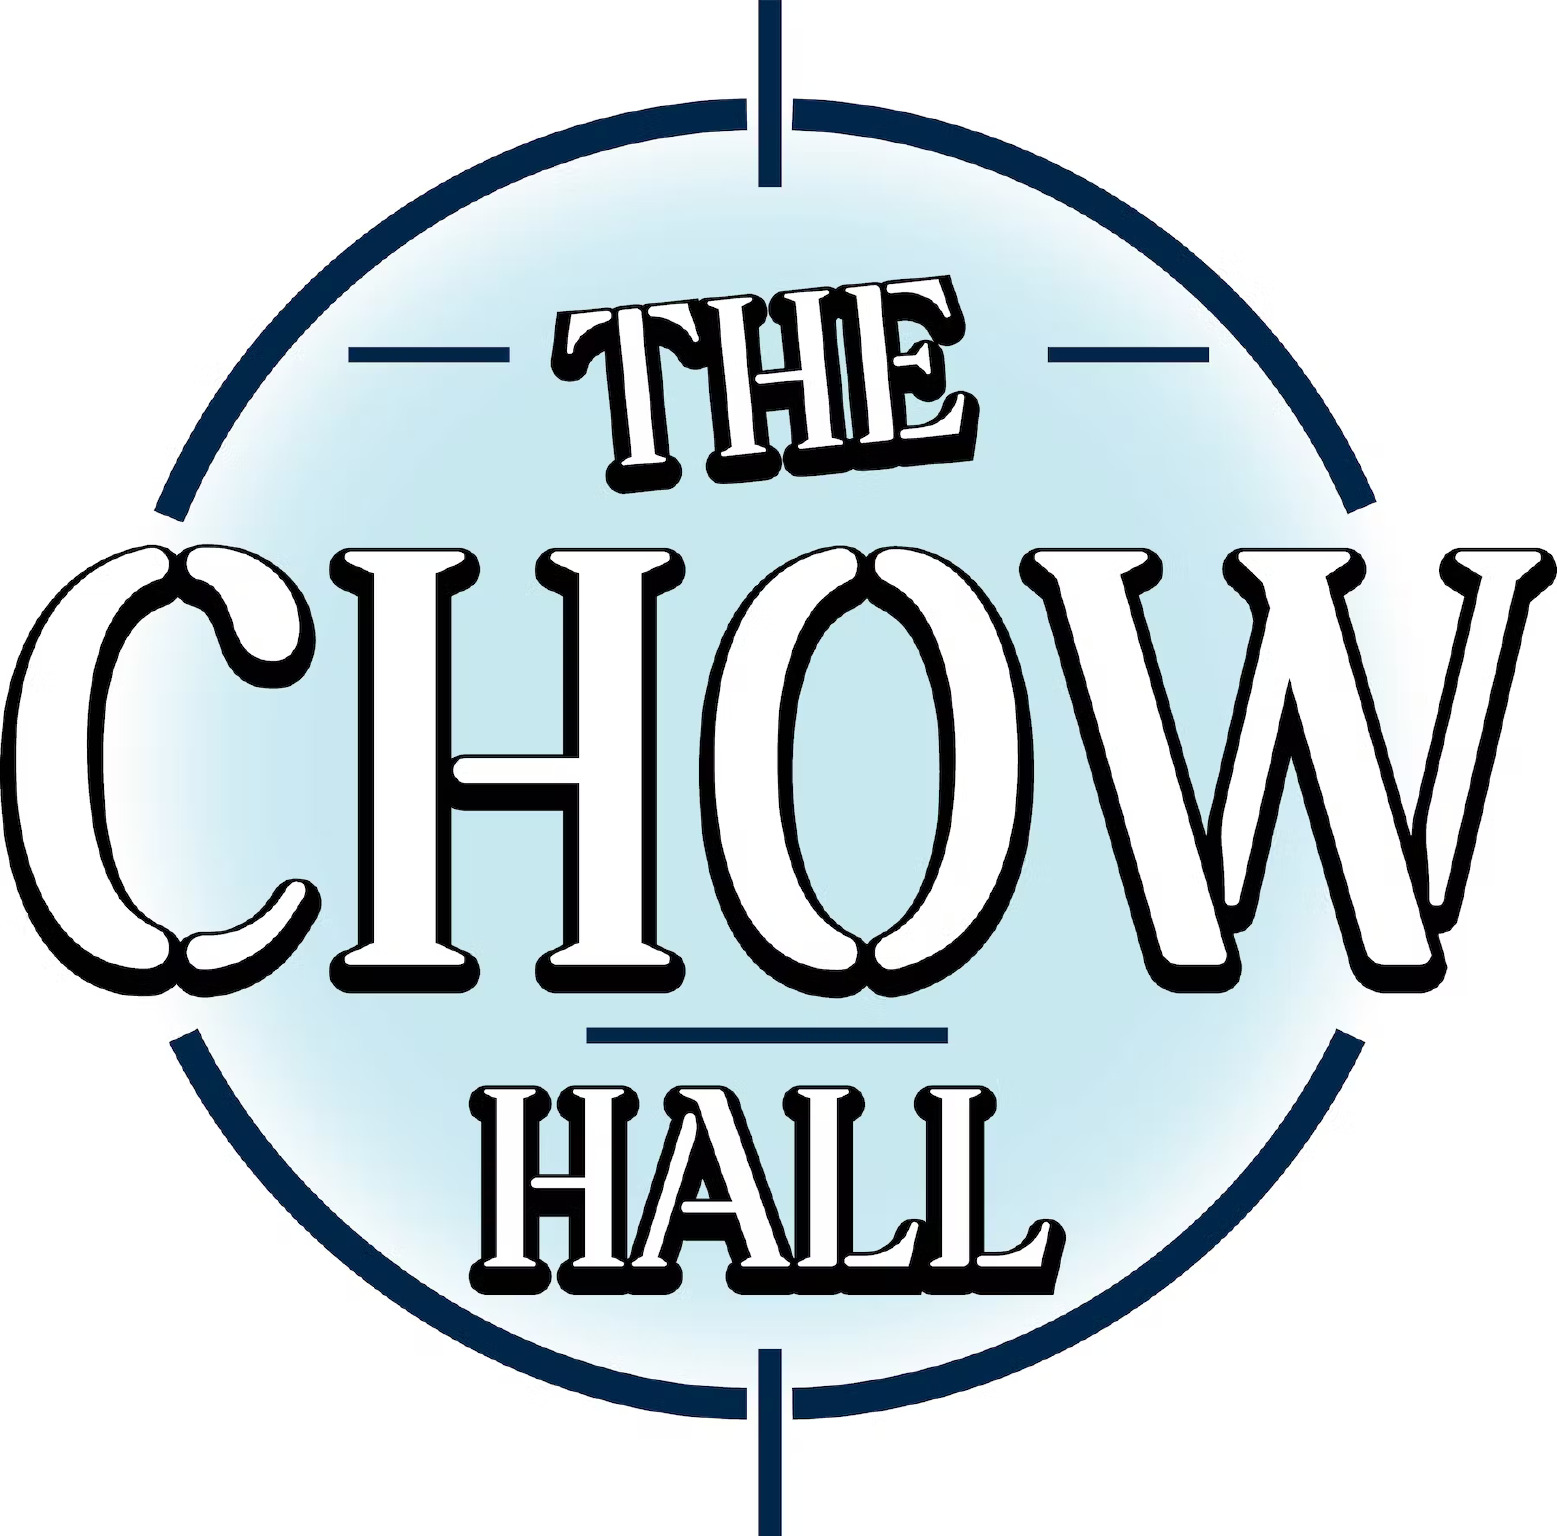 The Chow Hall Home